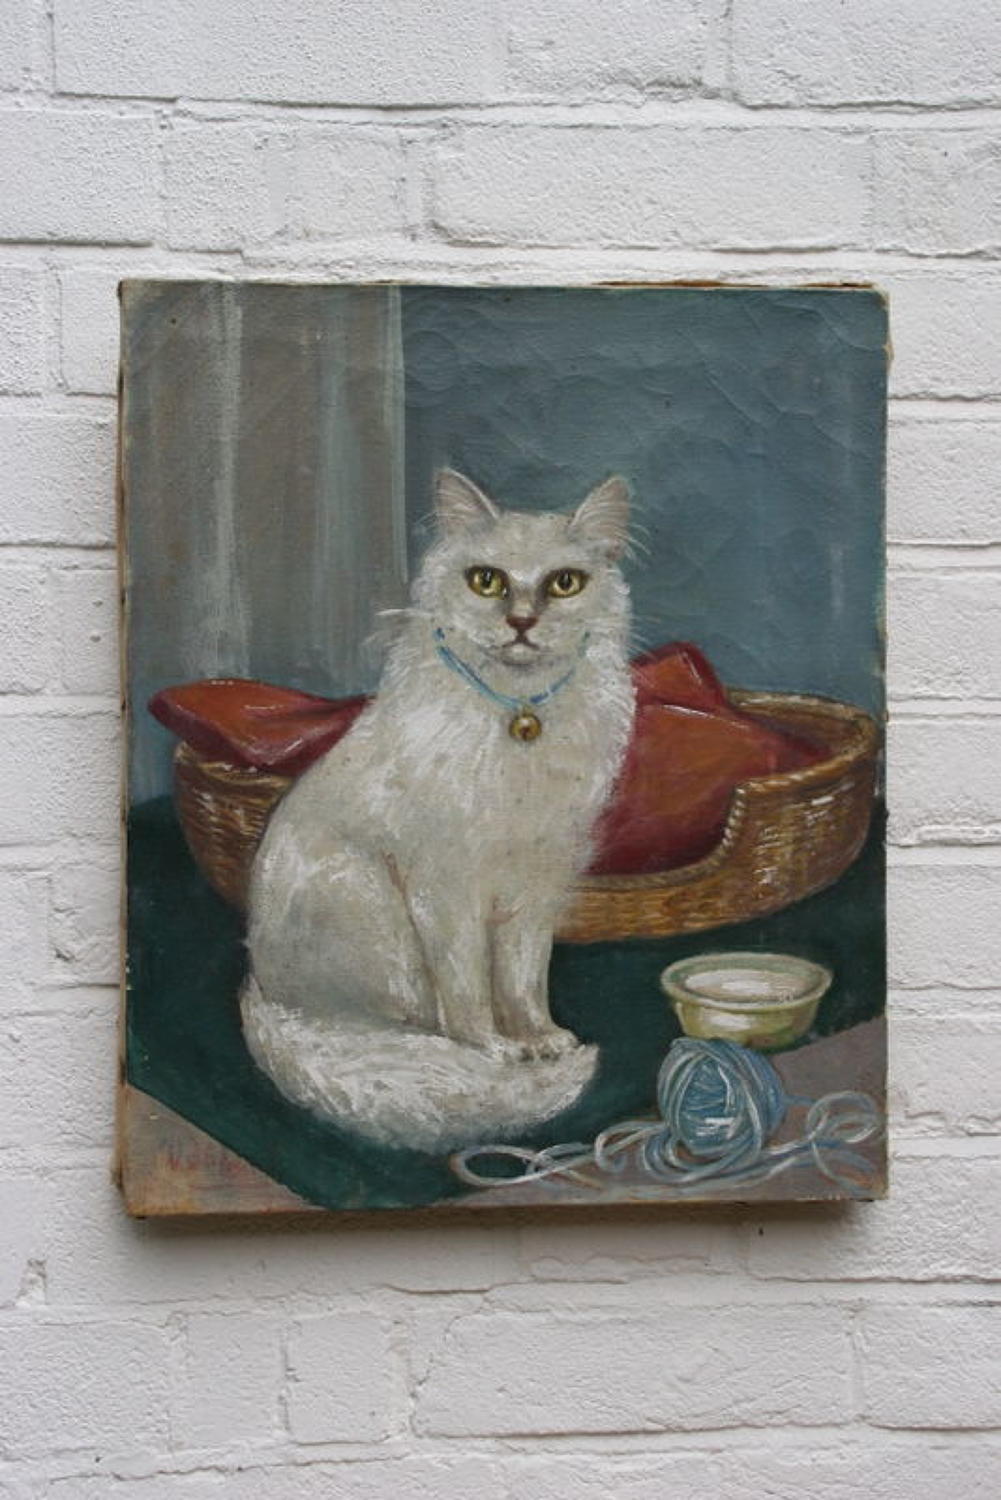 Cat portrait, oil on canvas, early 20th century